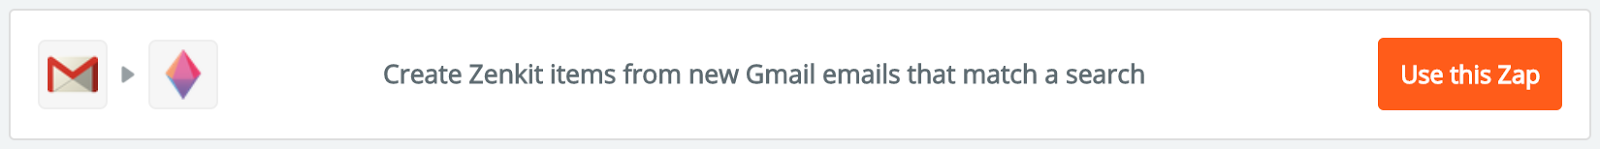 create new items from gmail zap